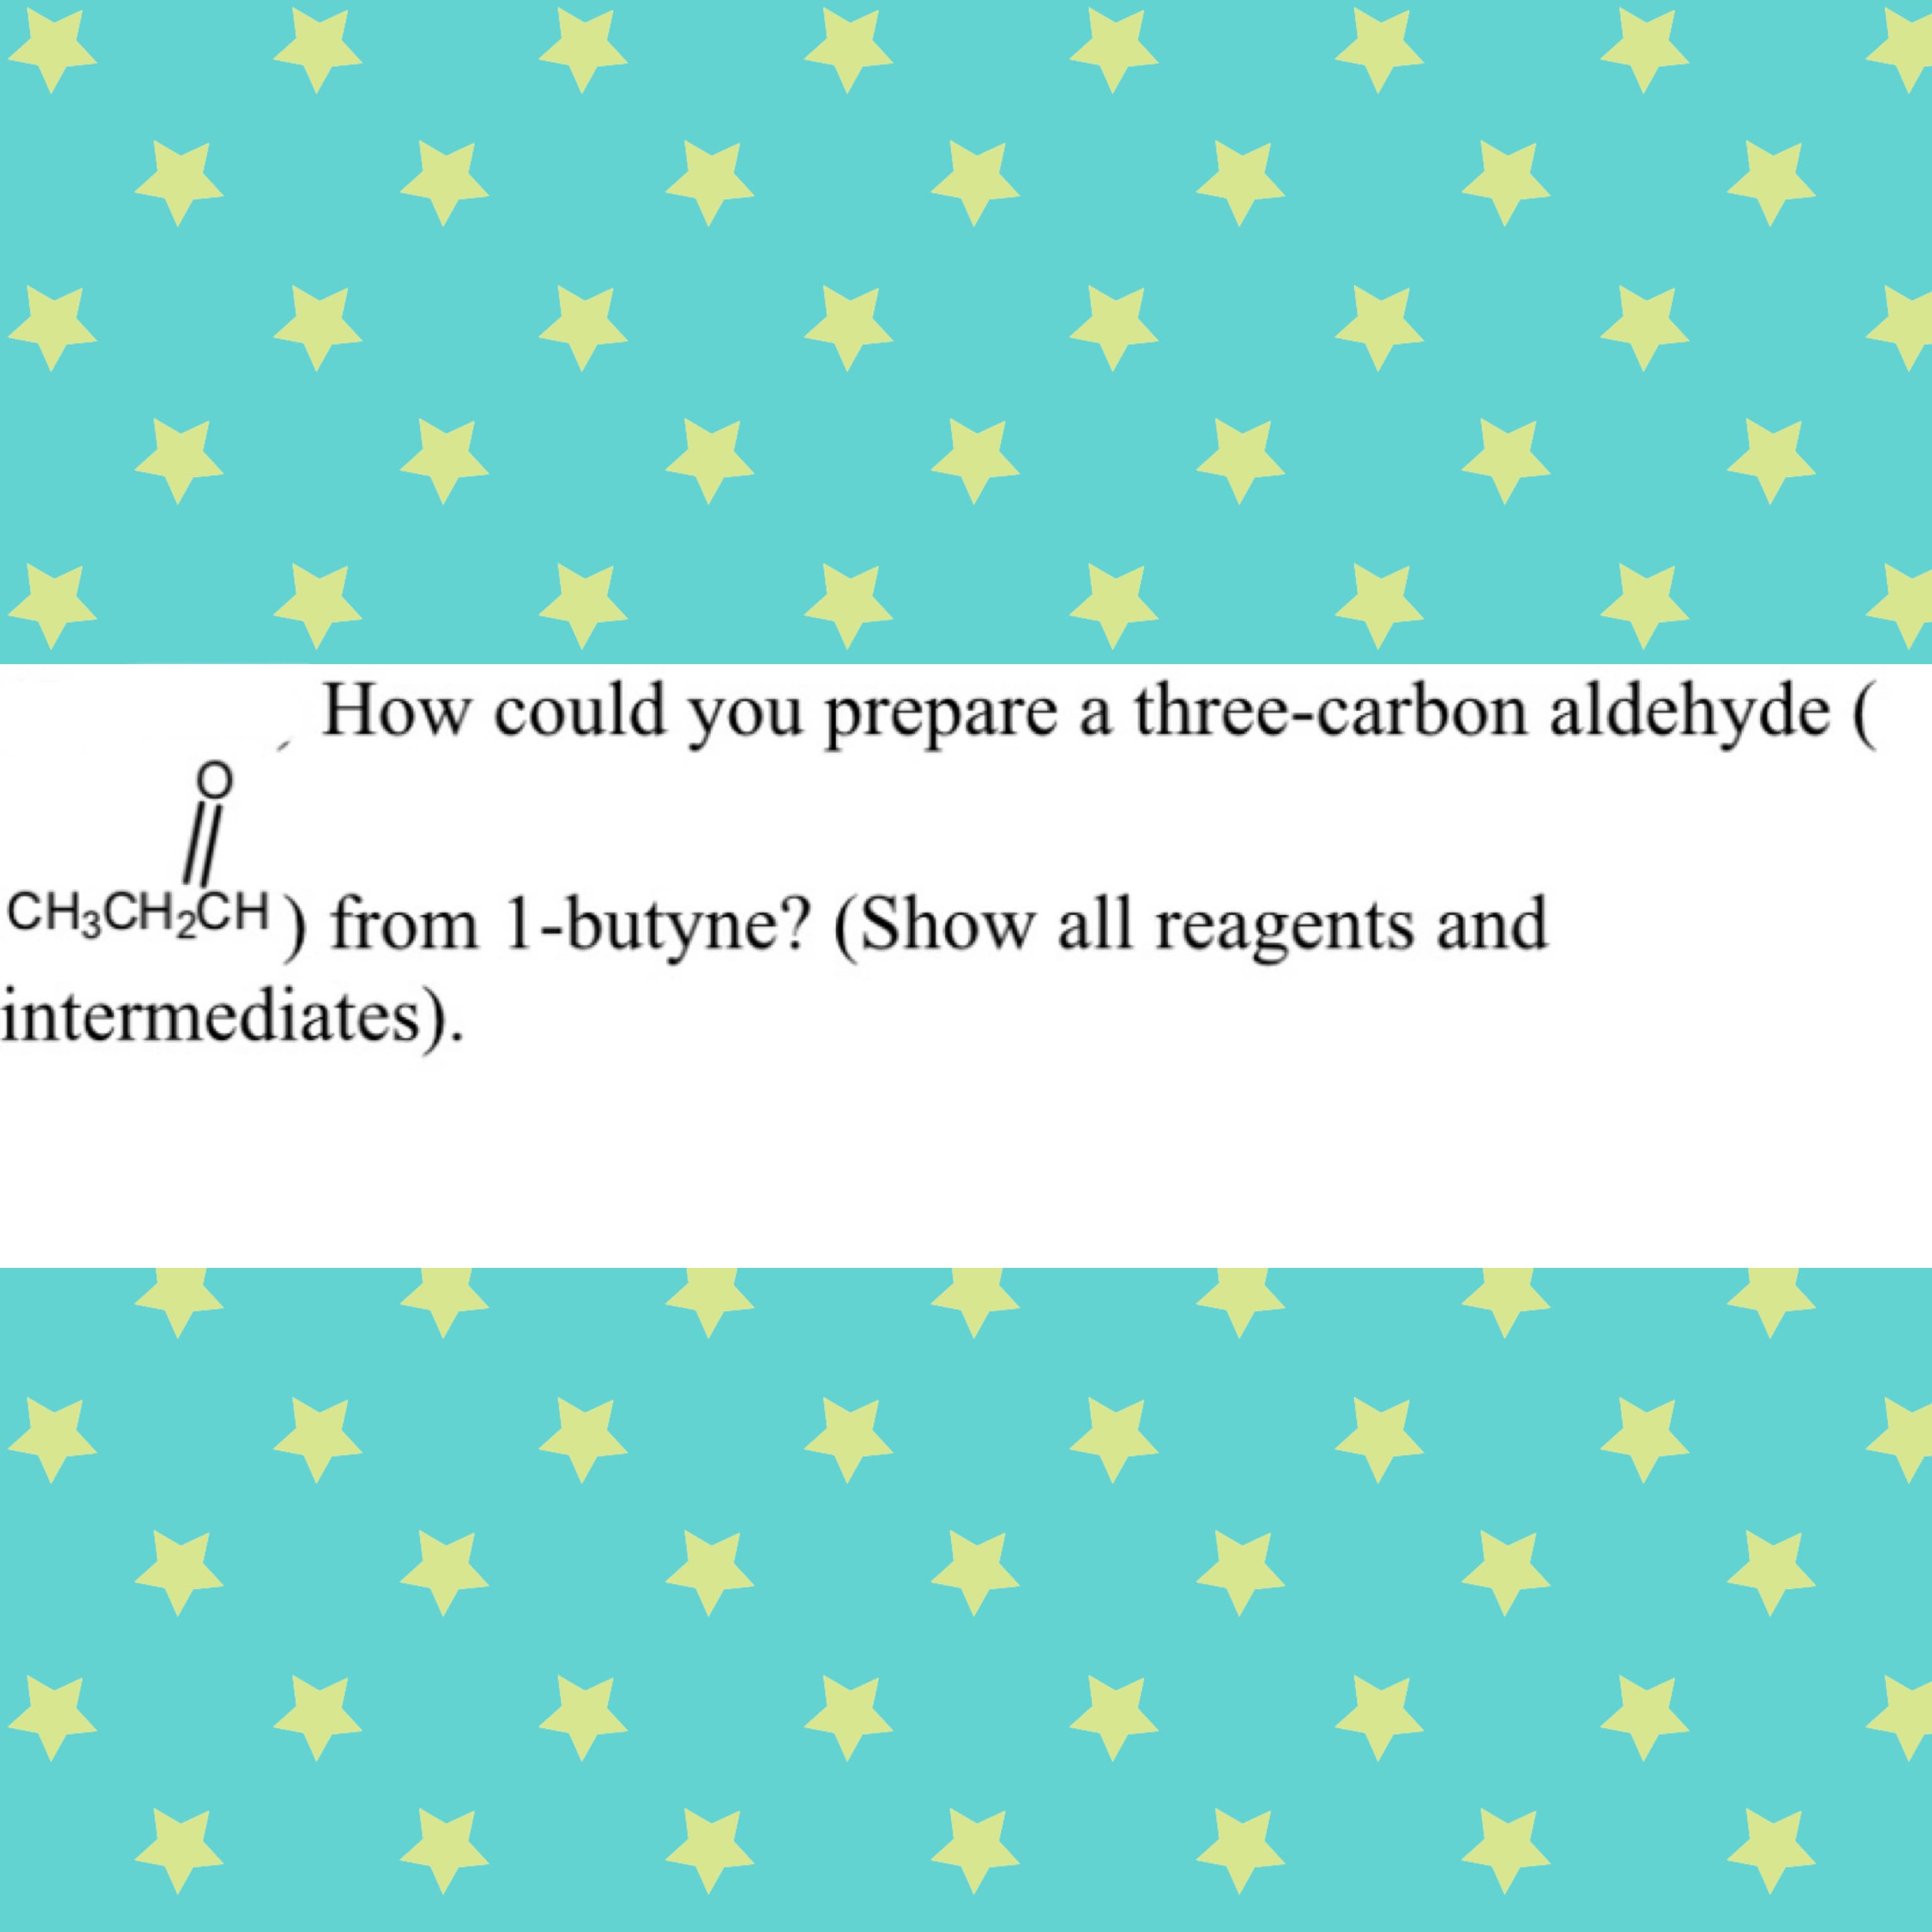 How could you prepare a three-carbon aldehyde (
CH3CH2CH) from 1-butyne? (Show all reagents and
ntermediates).
